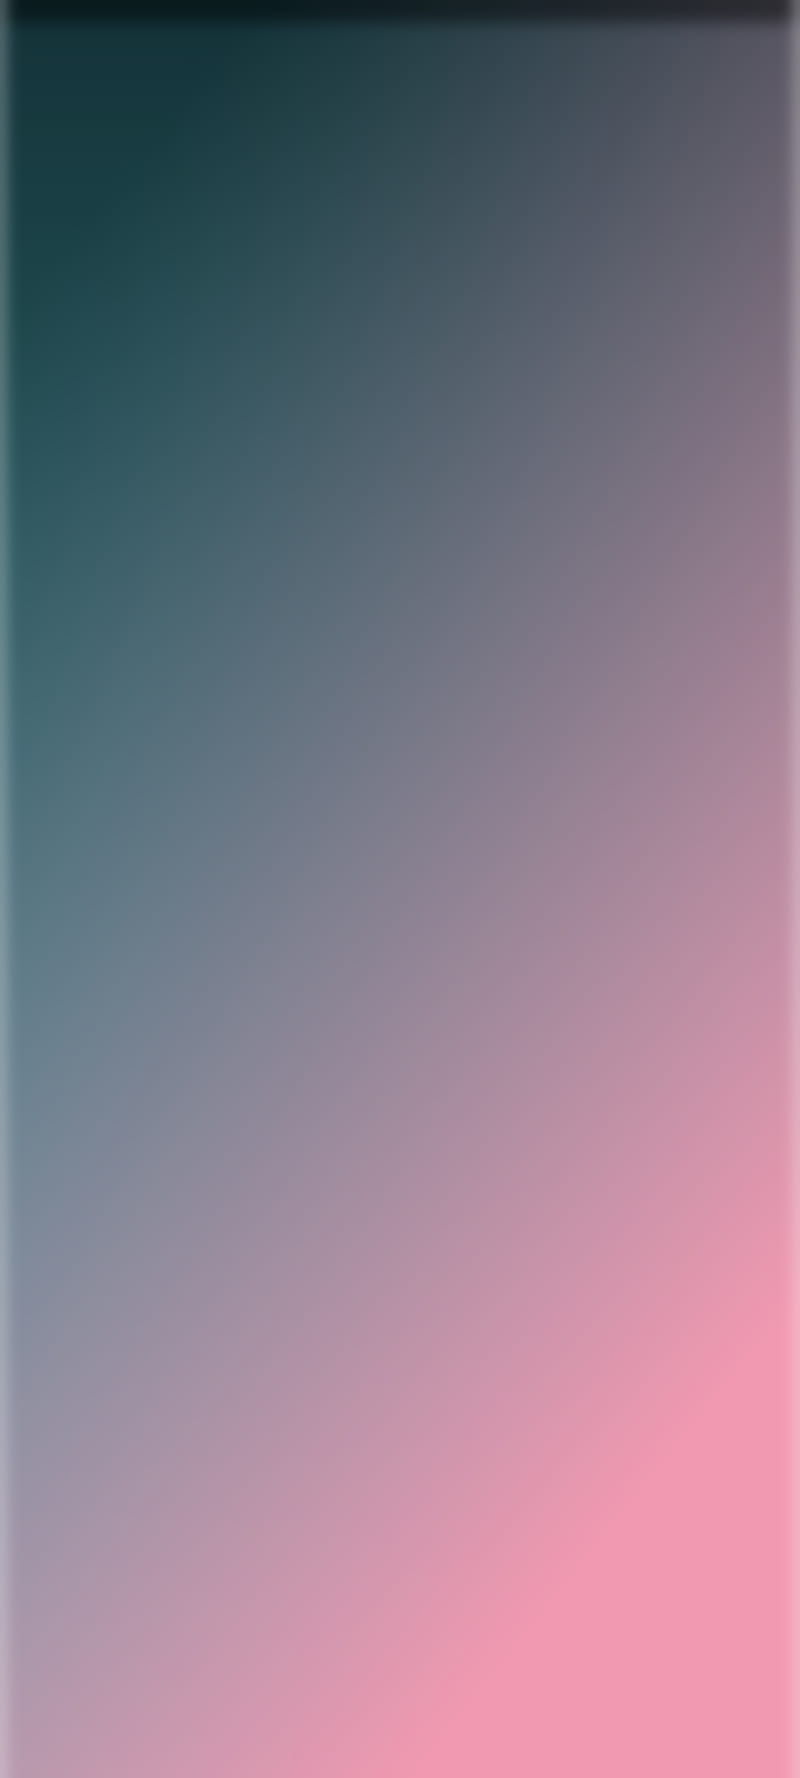 modern1 EDGE iP13, iPhone, New, Samsung Galaxy, Color Art, Modern, Simple, Design, Lights, Colours, Phone, award winner, , Vintage Style, A51, Lenovo, Google, Pogo, Gradient, Druffix, 2021, Classic, M32, Magma, Soft, Android, Fantastic, Acer, iPhone13, Neo, LG, Original, iPhone14, HD phone wallpaper